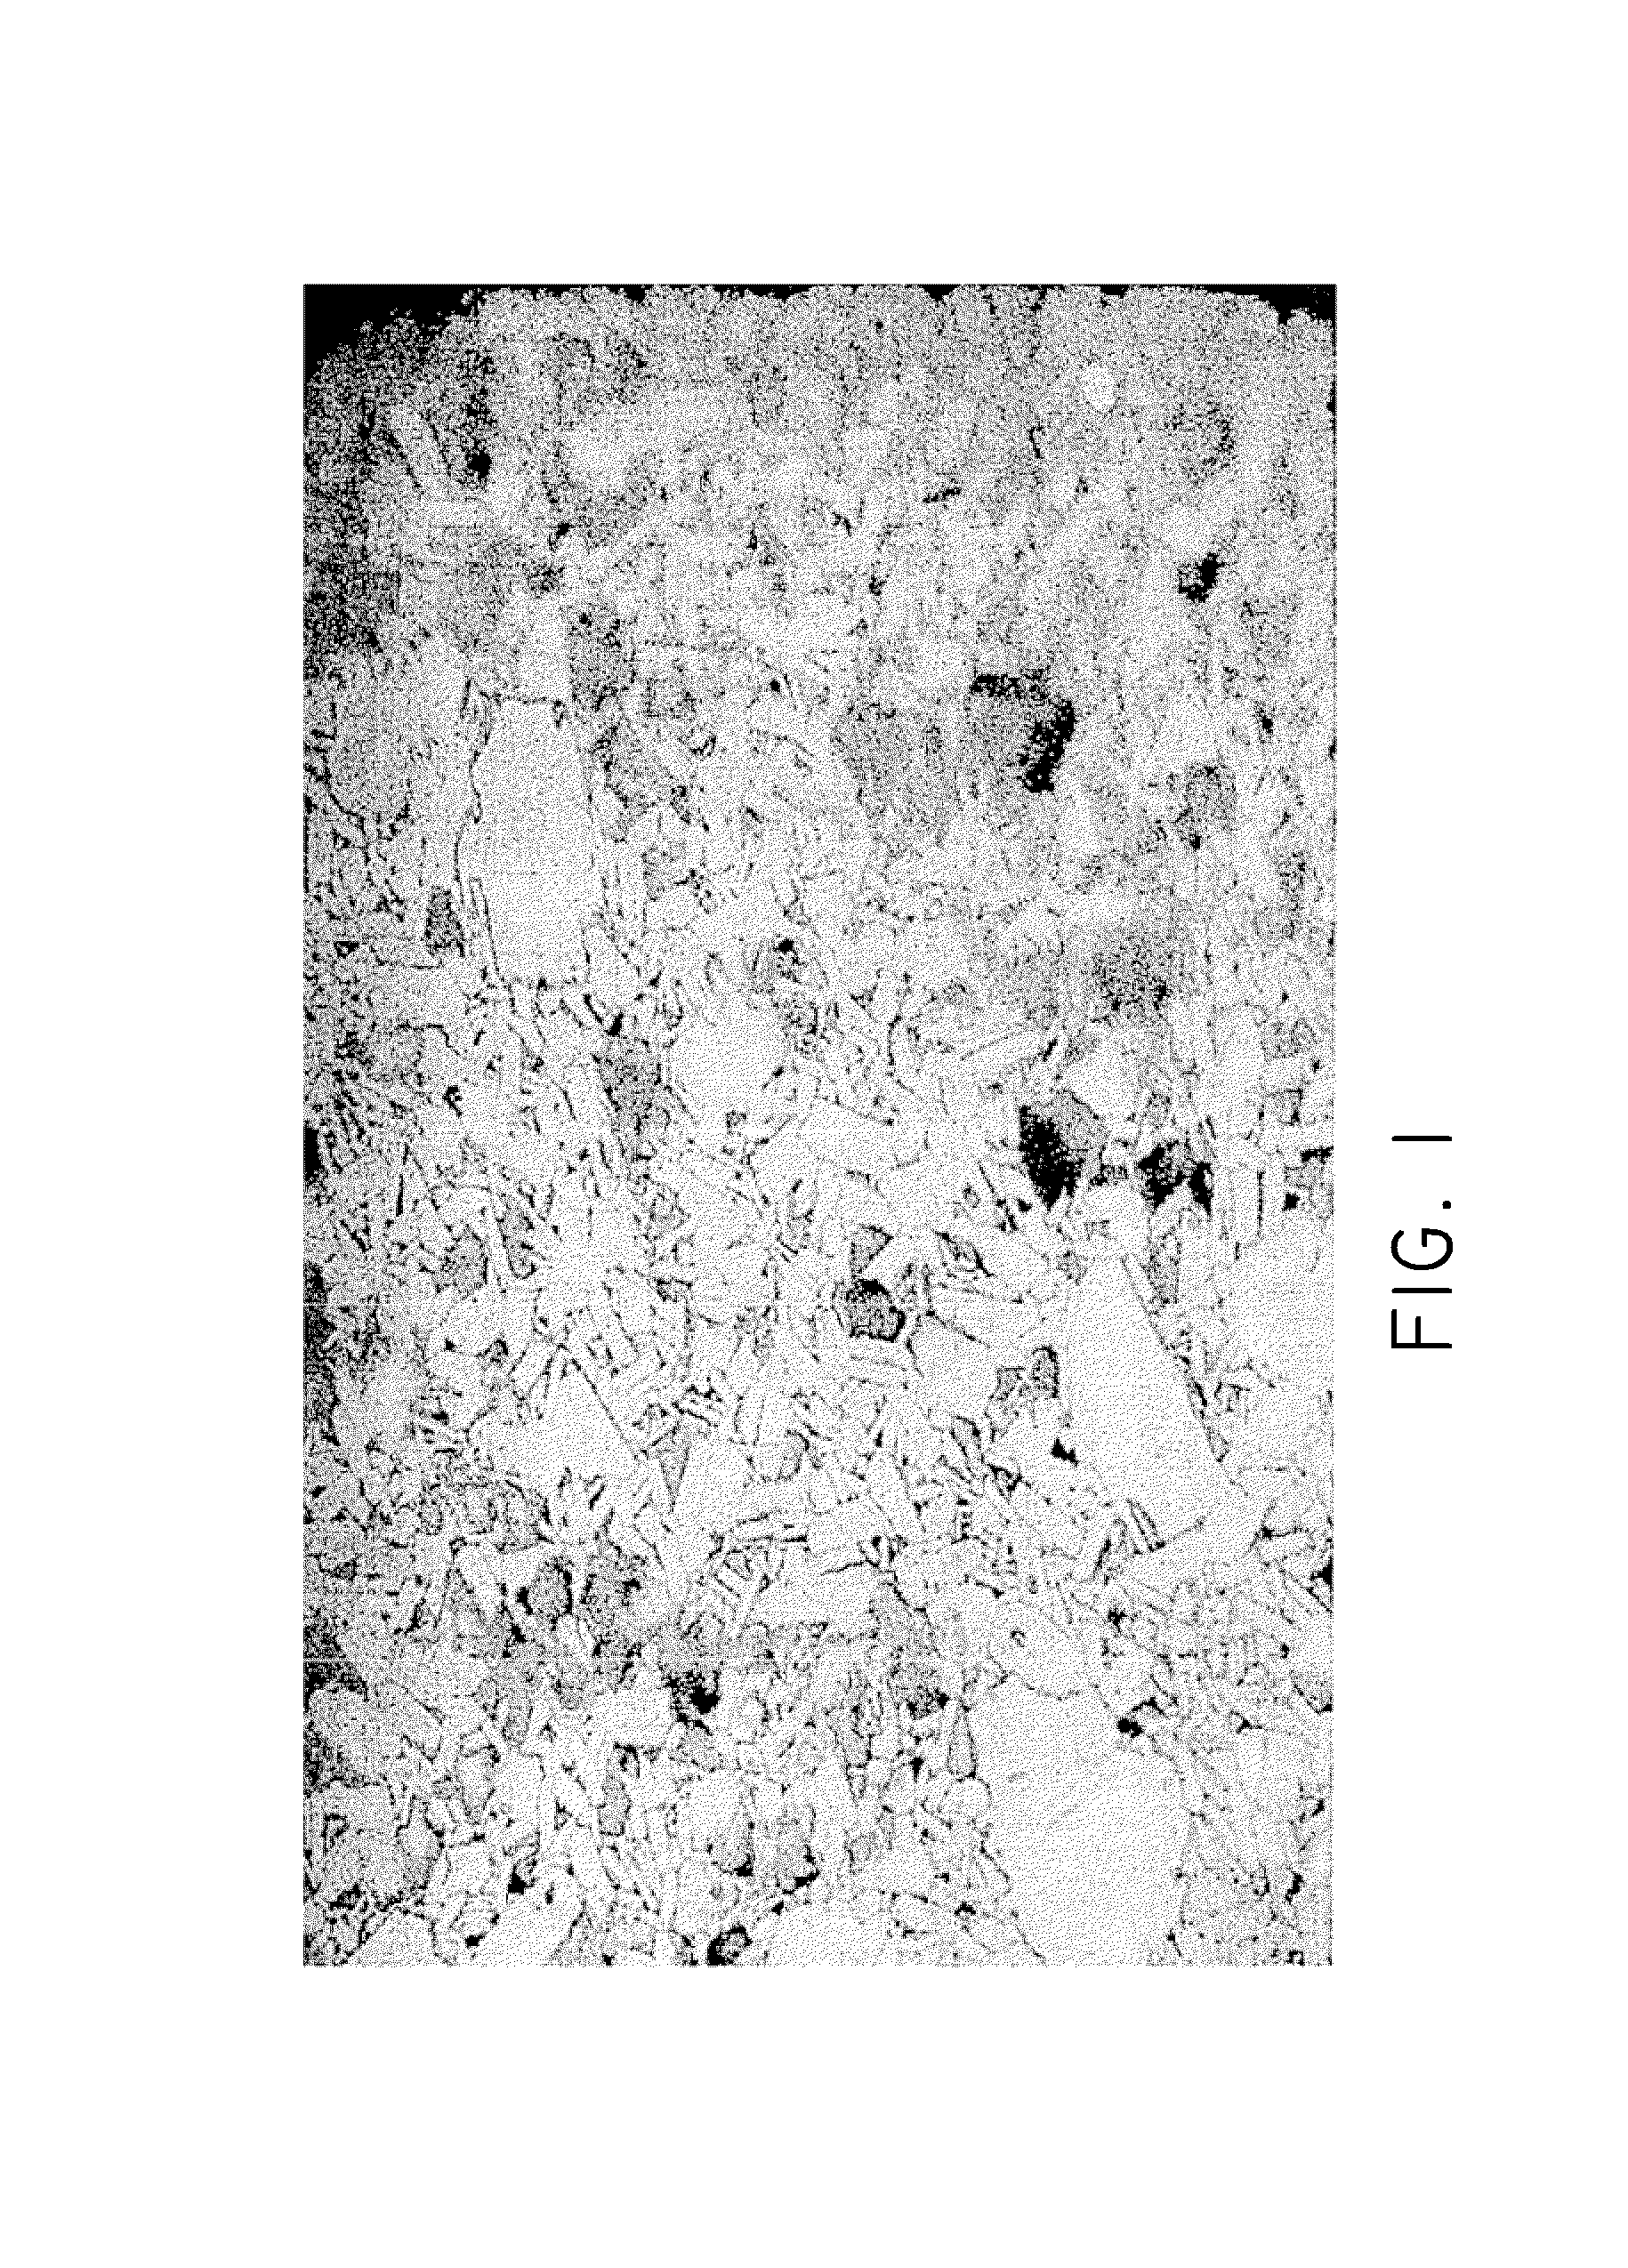 Specialty materials processing techniques for enhanced resonant frequency hexaferrite materials for antenna applications and other electronic devices